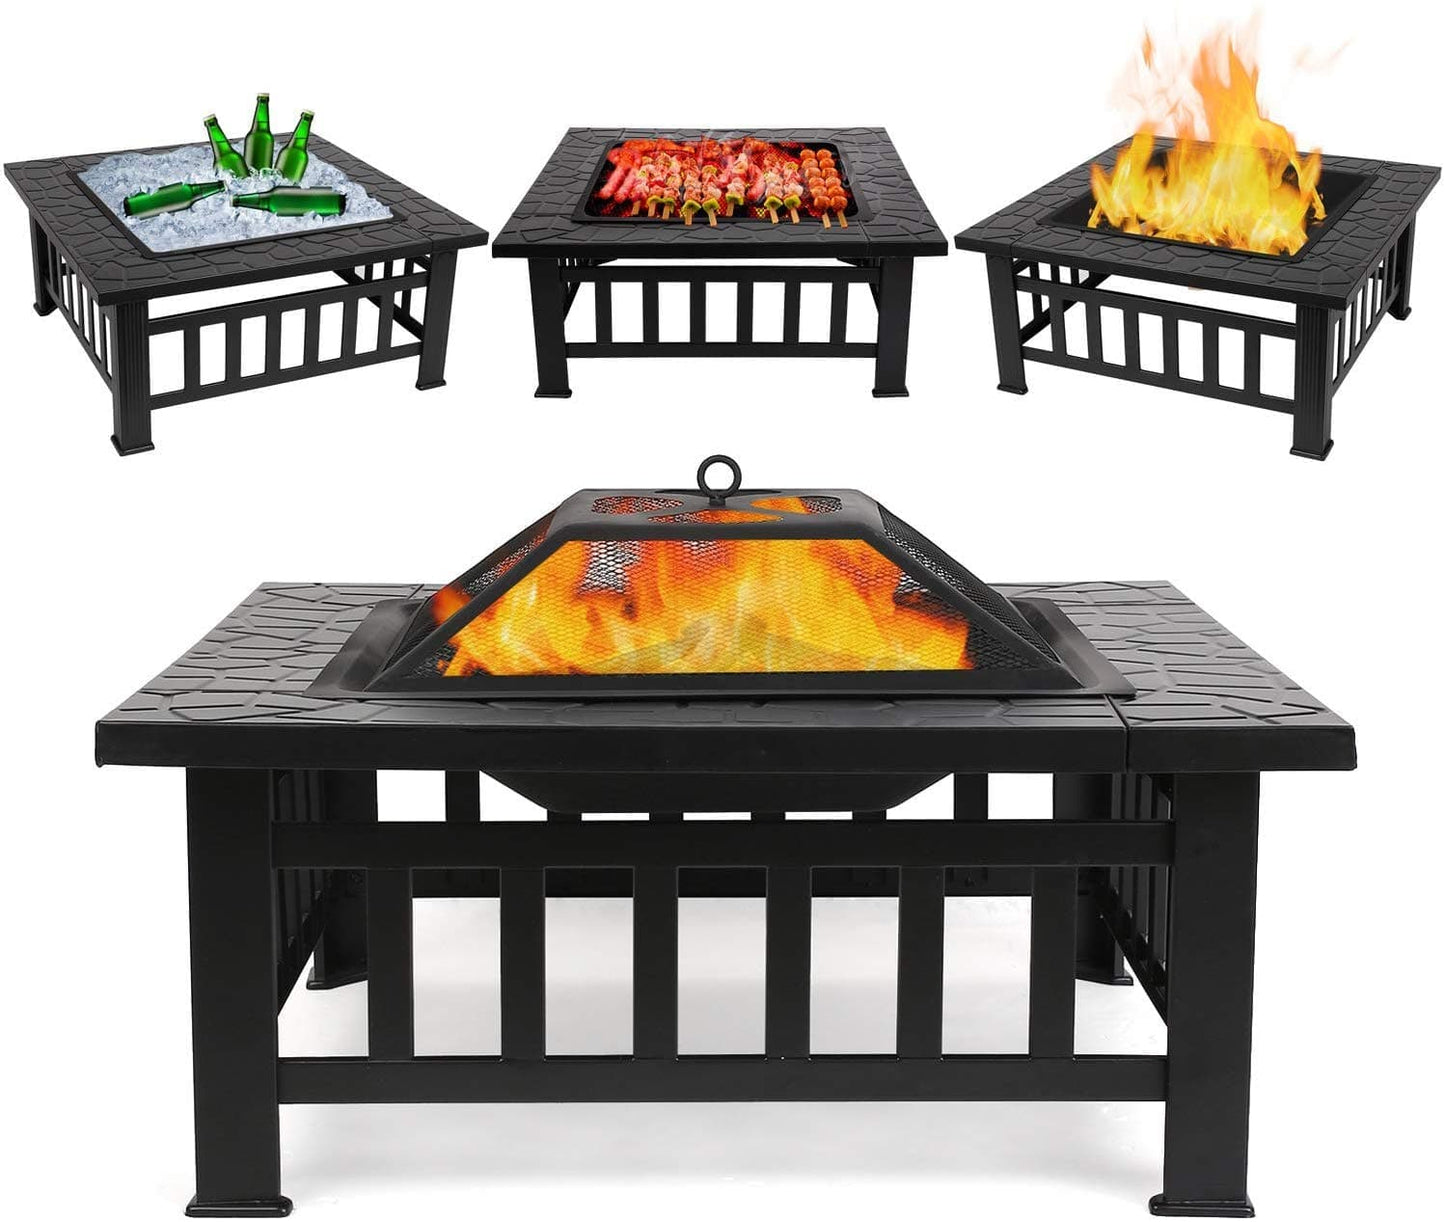 TFC&H Co. 32 inch Outdoor Fire Pit Table- Ships from The US - fire pit table at TFC&H Co.